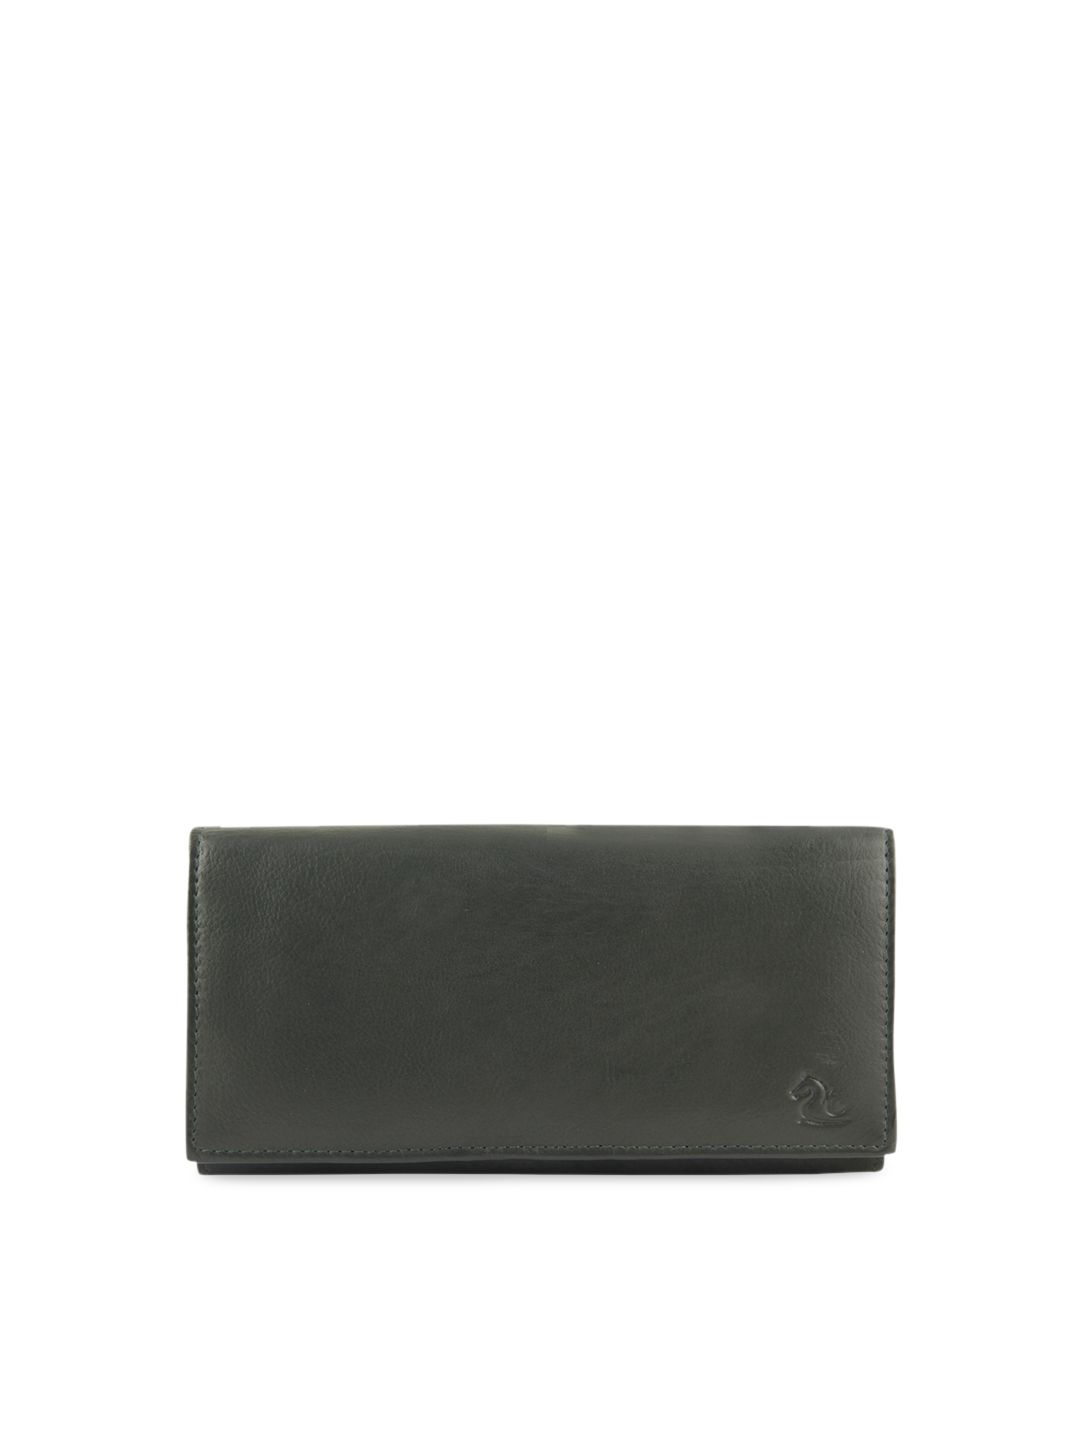 Kara Women Olive Green Solid Leather Envelope Price in India